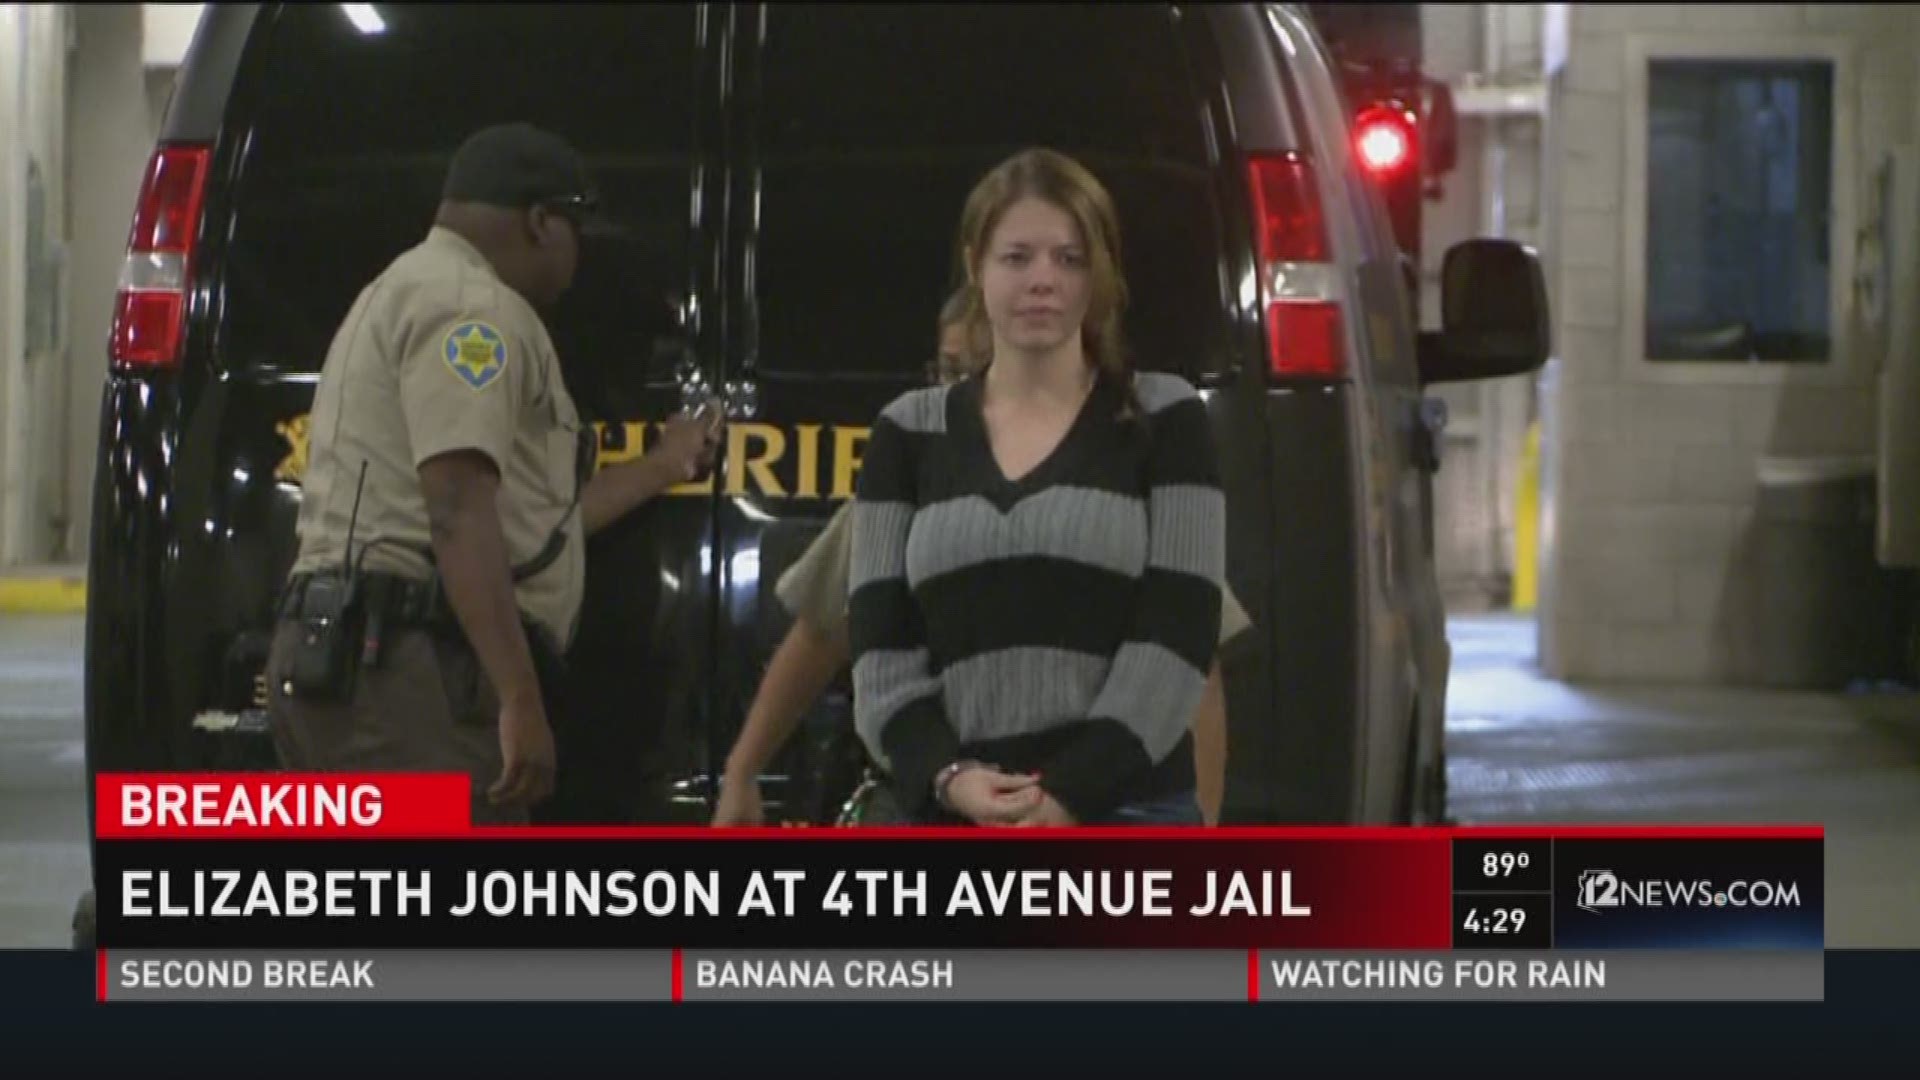 Elizabeth Johnson is back in Arizona at the 4th Avenue jail after violating her probation